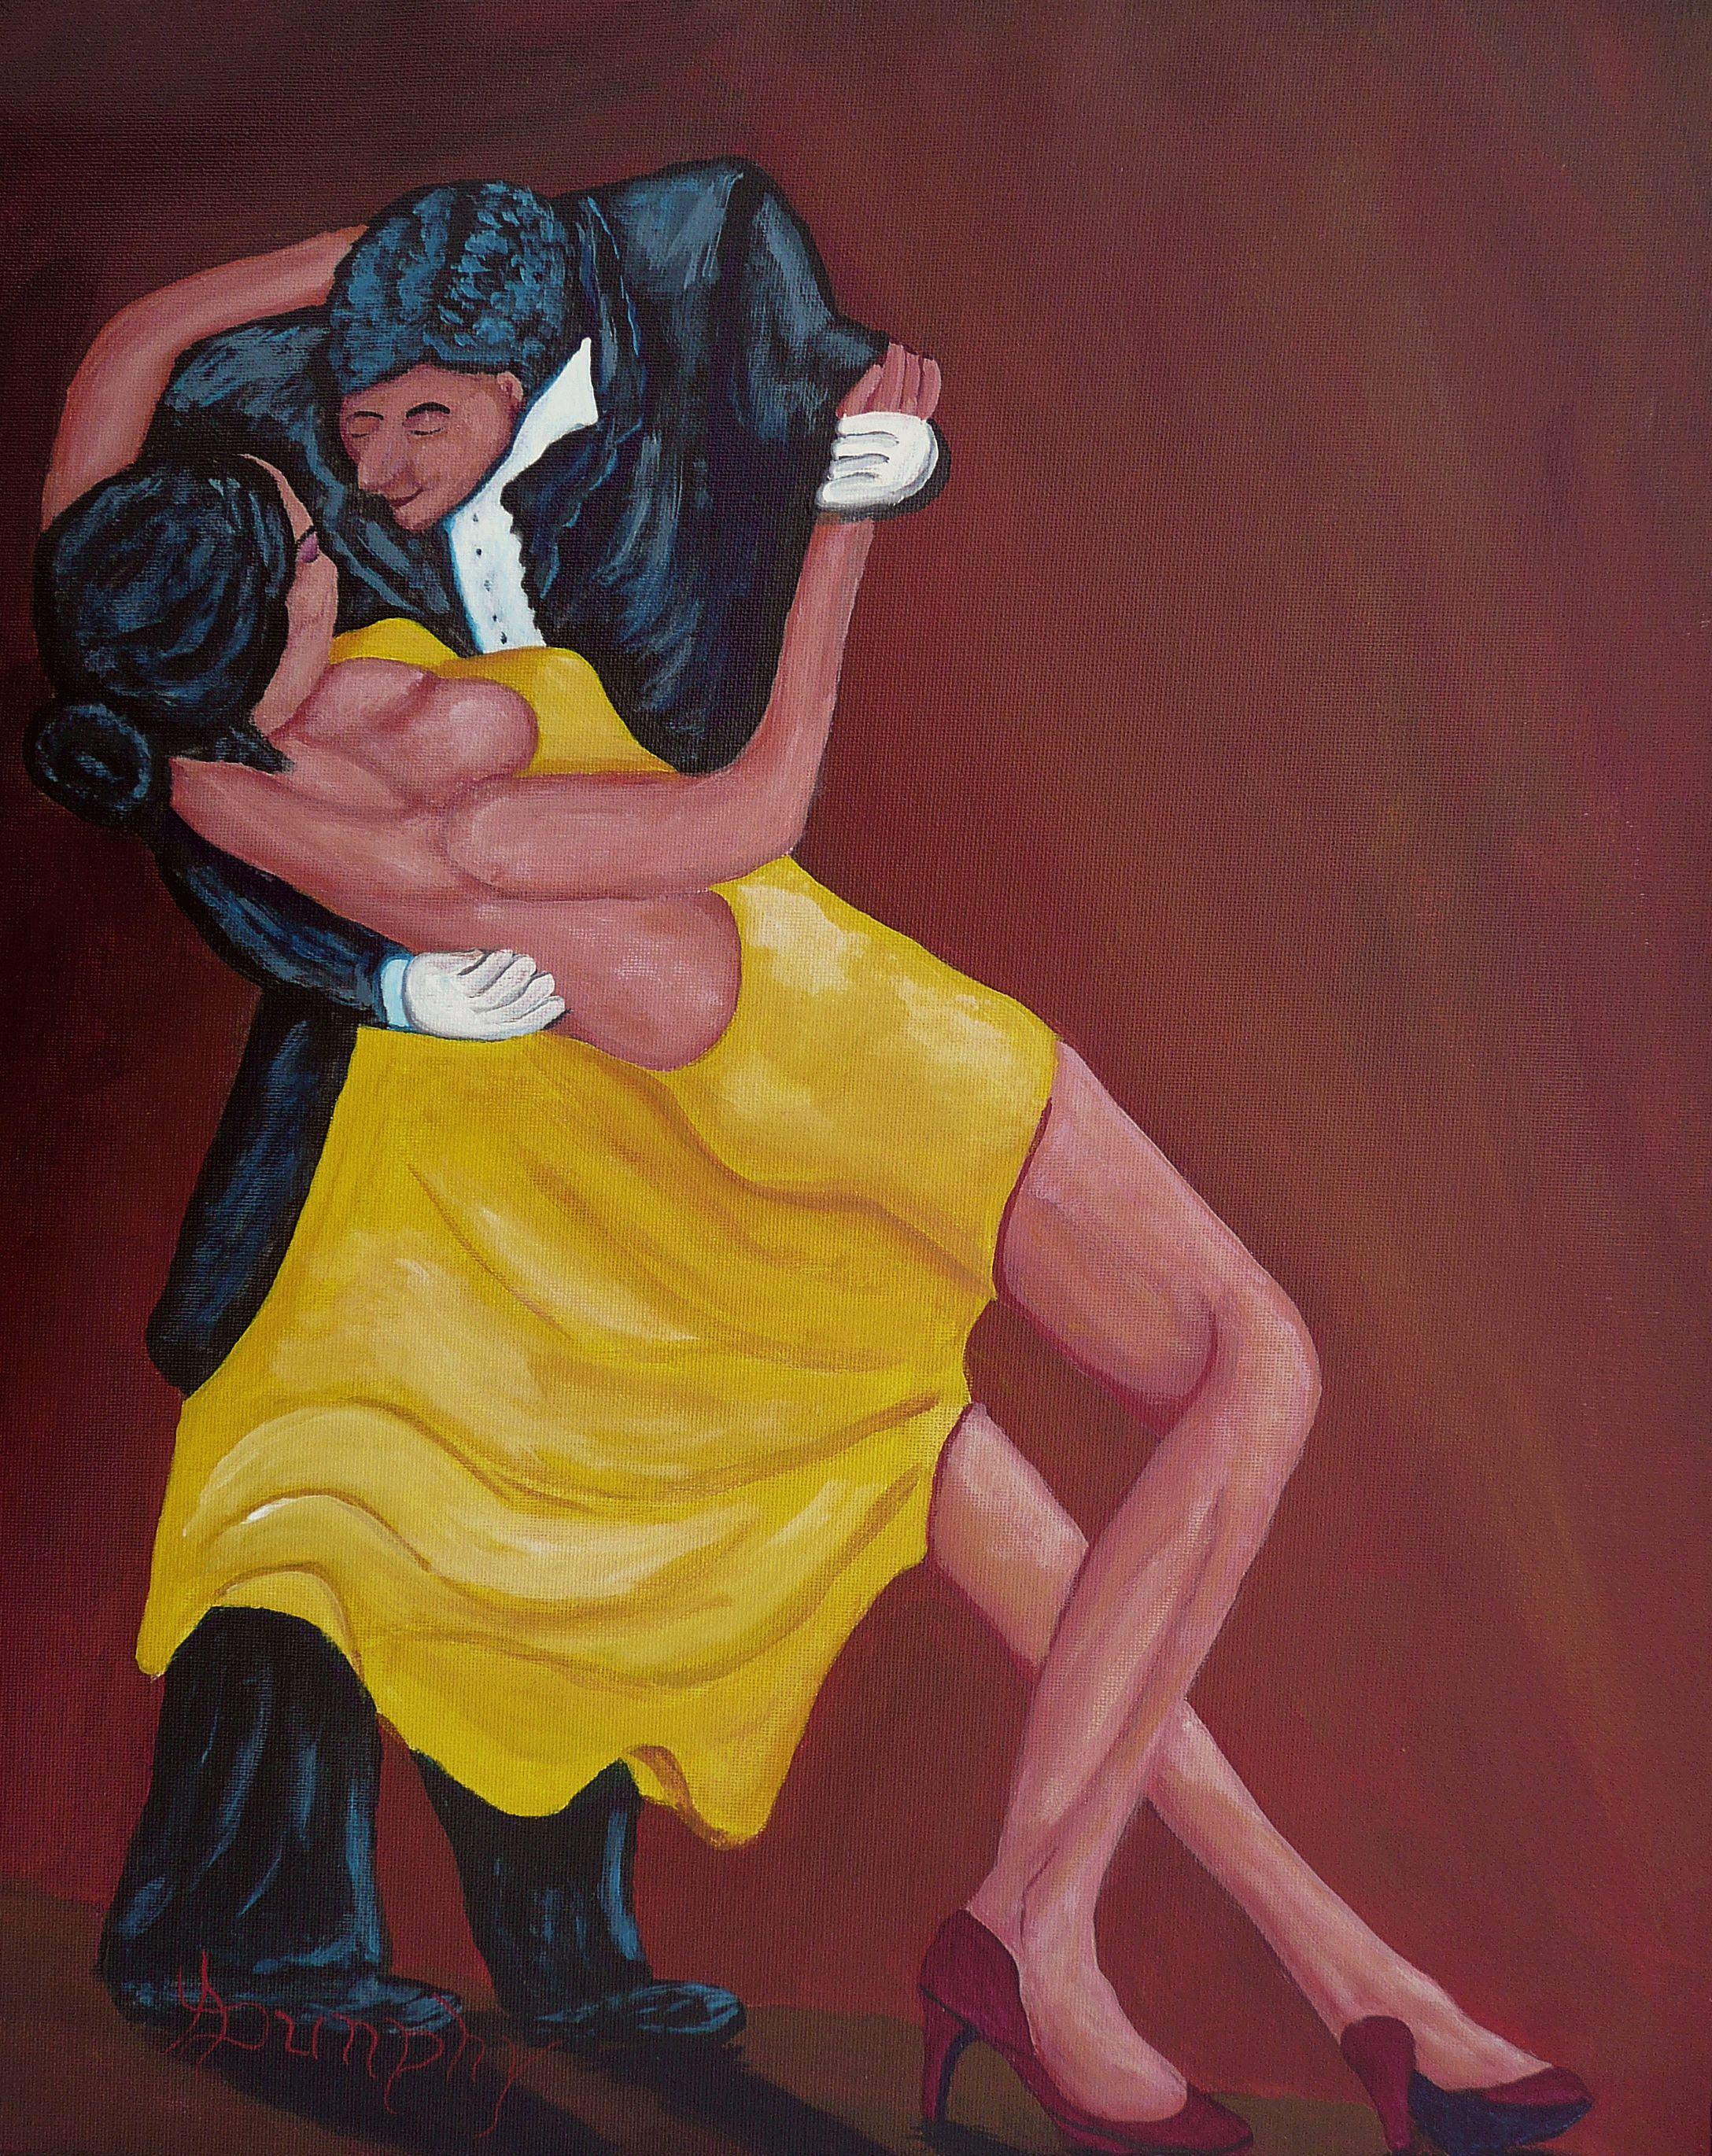 A young couple enjoying the rhythm of the music as they dance he night away. This music themed painting has been created using only professional grade acrylics on un-stretched canvas with an overall size of 16x20 inches or 50x40 centimeters. ::